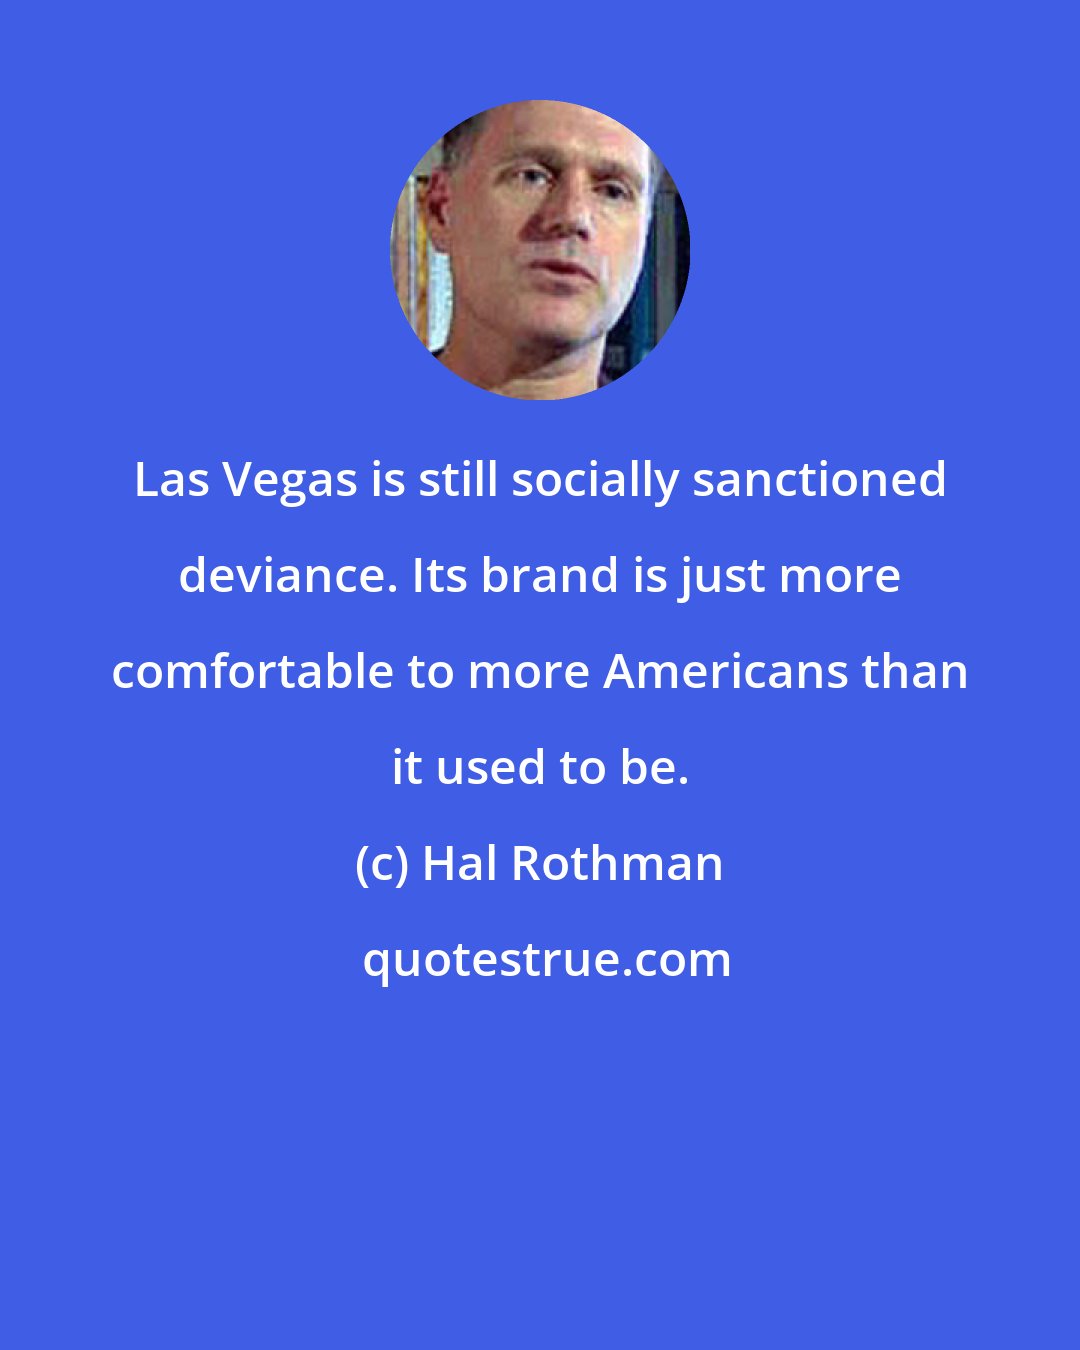 Hal Rothman: Las Vegas is still socially sanctioned deviance. Its brand is just more comfortable to more Americans than it used to be.